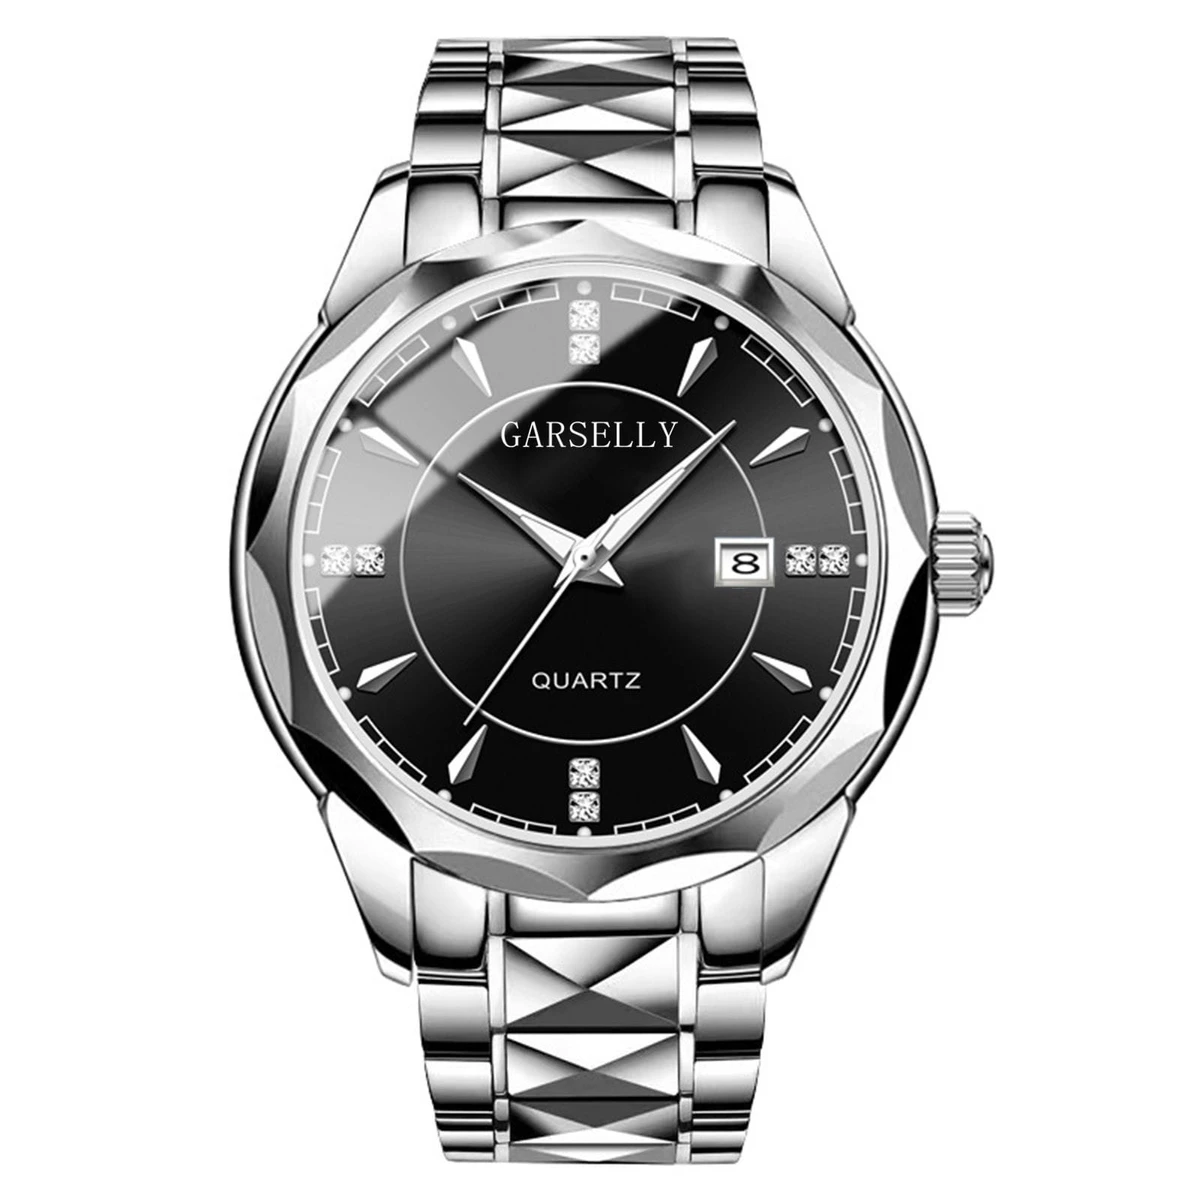 GARSELLY - Luxury Man Wristwatch Waterproof Watch for Men Stainless Steel Men's Watches High Quality+Box-Silver&Black